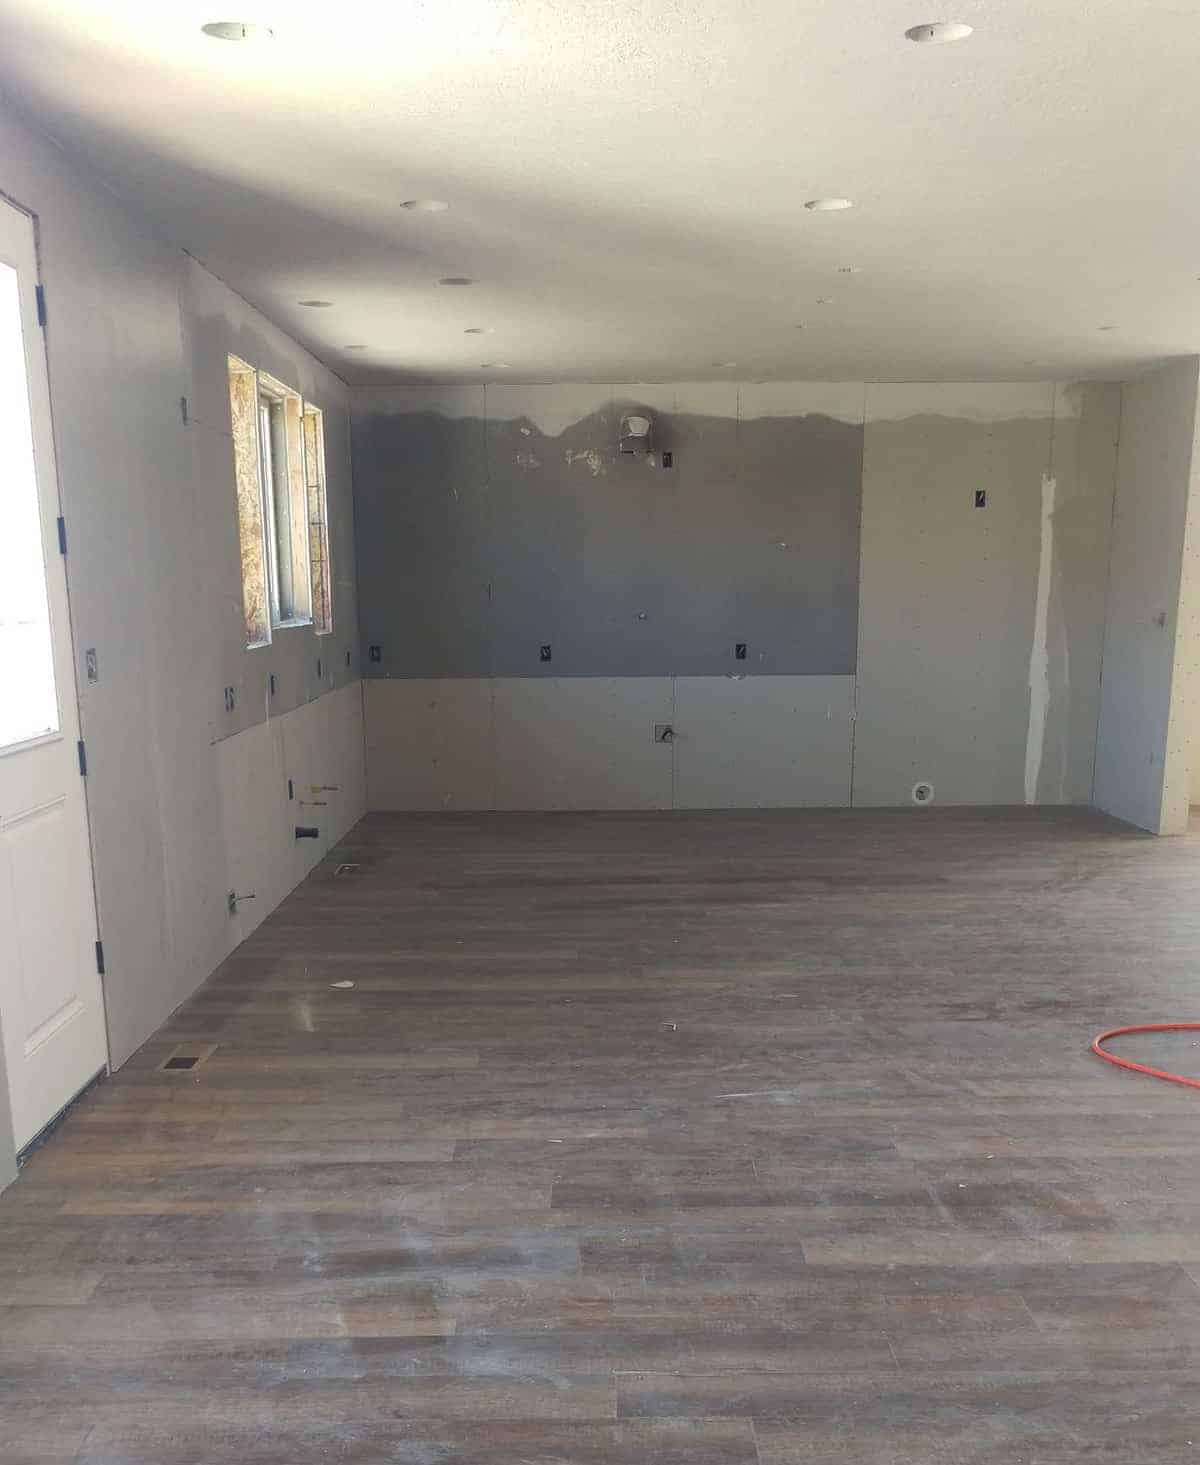 finished floors in a section of the house